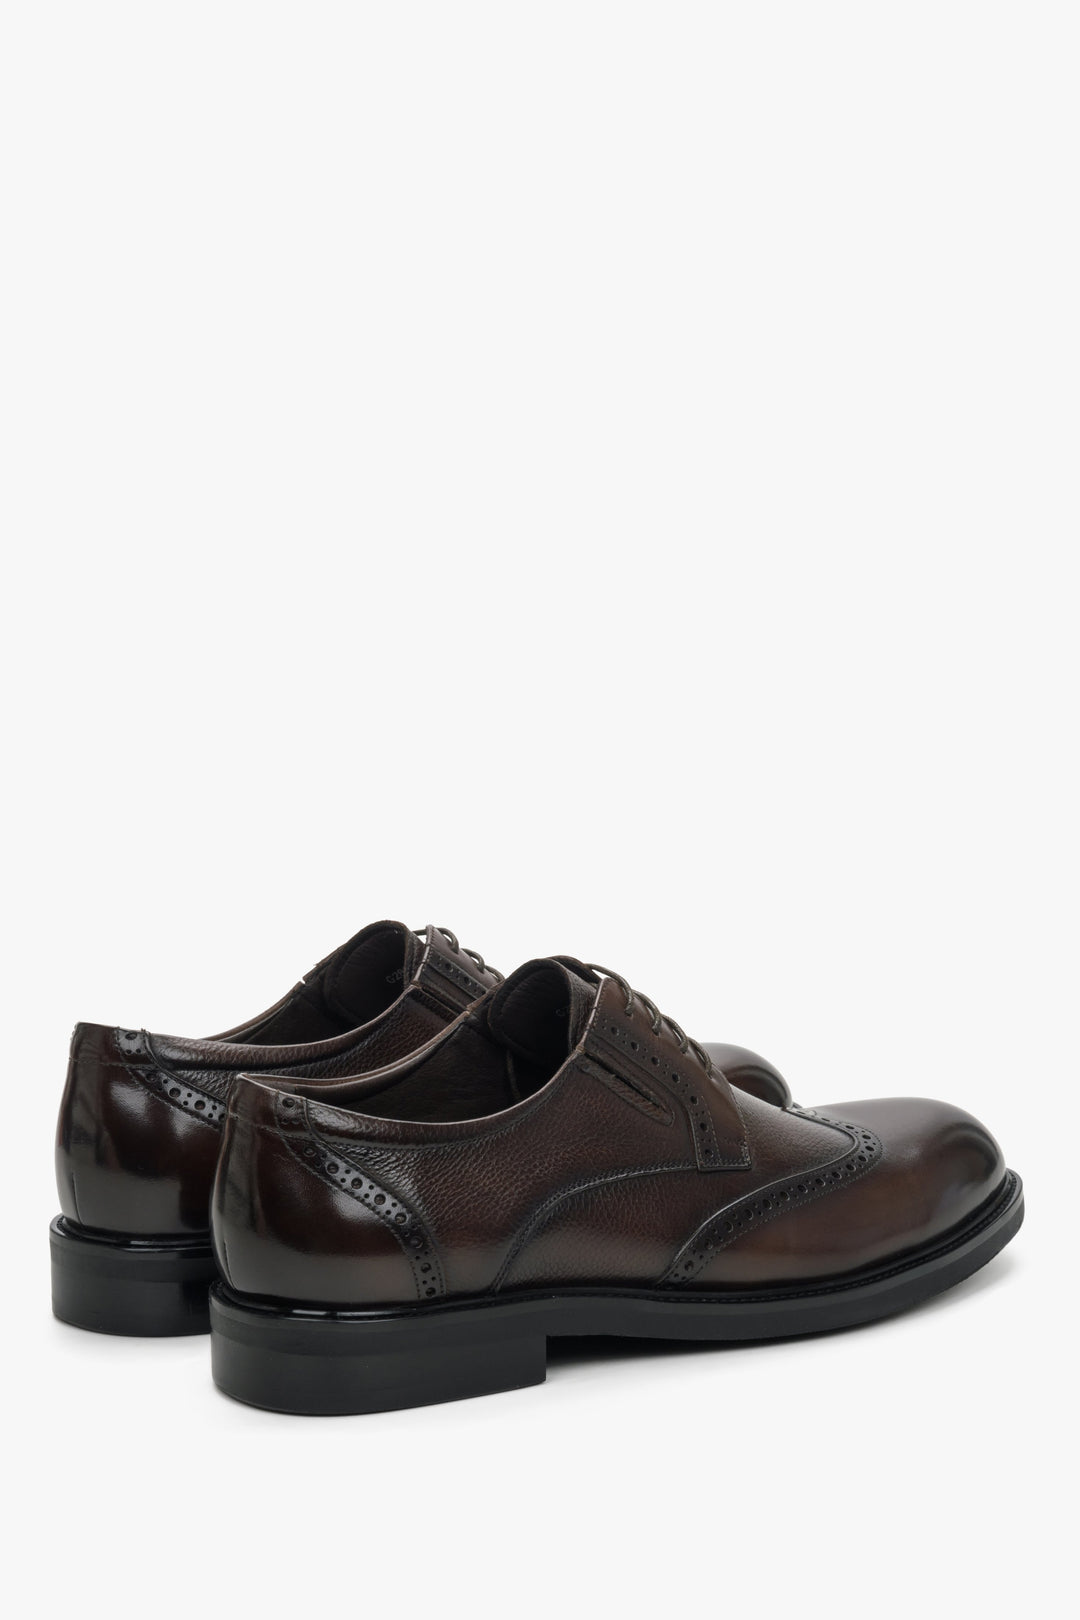 Estro men's brown leather lace-up shoes - close-up on the side line.